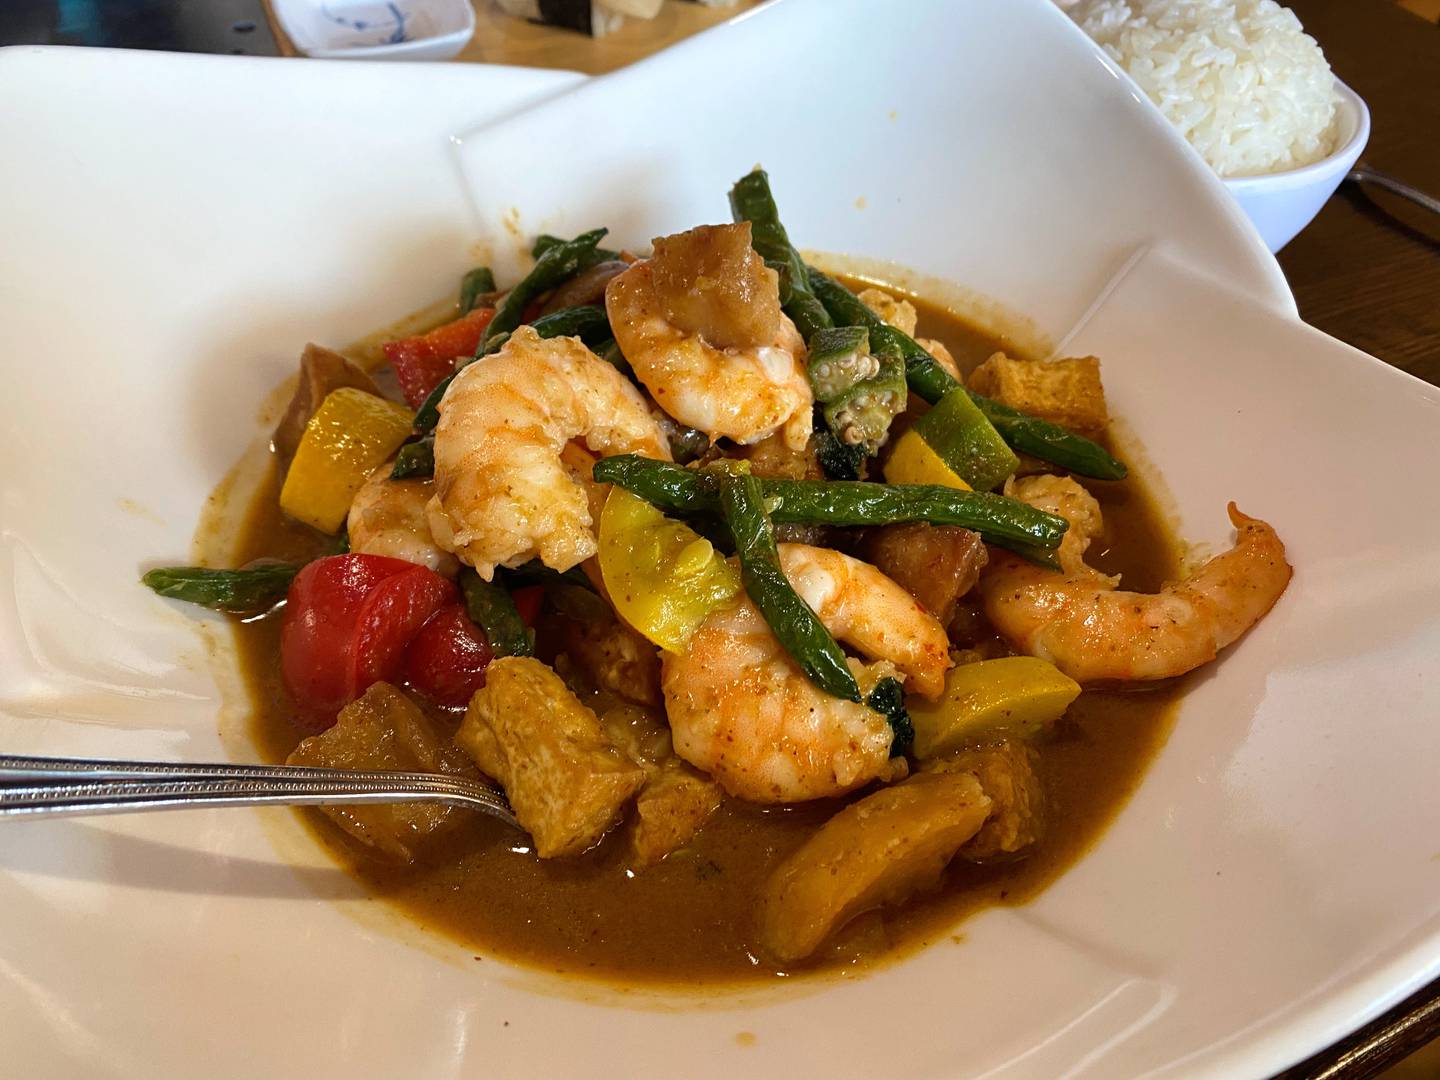 For my entree at Yummy Asian Bistro, I chose the panang curry, one of the Thai dishes on the menu. It came with tofu, summer squash, green beans and red peppers in addition to the shrimp.